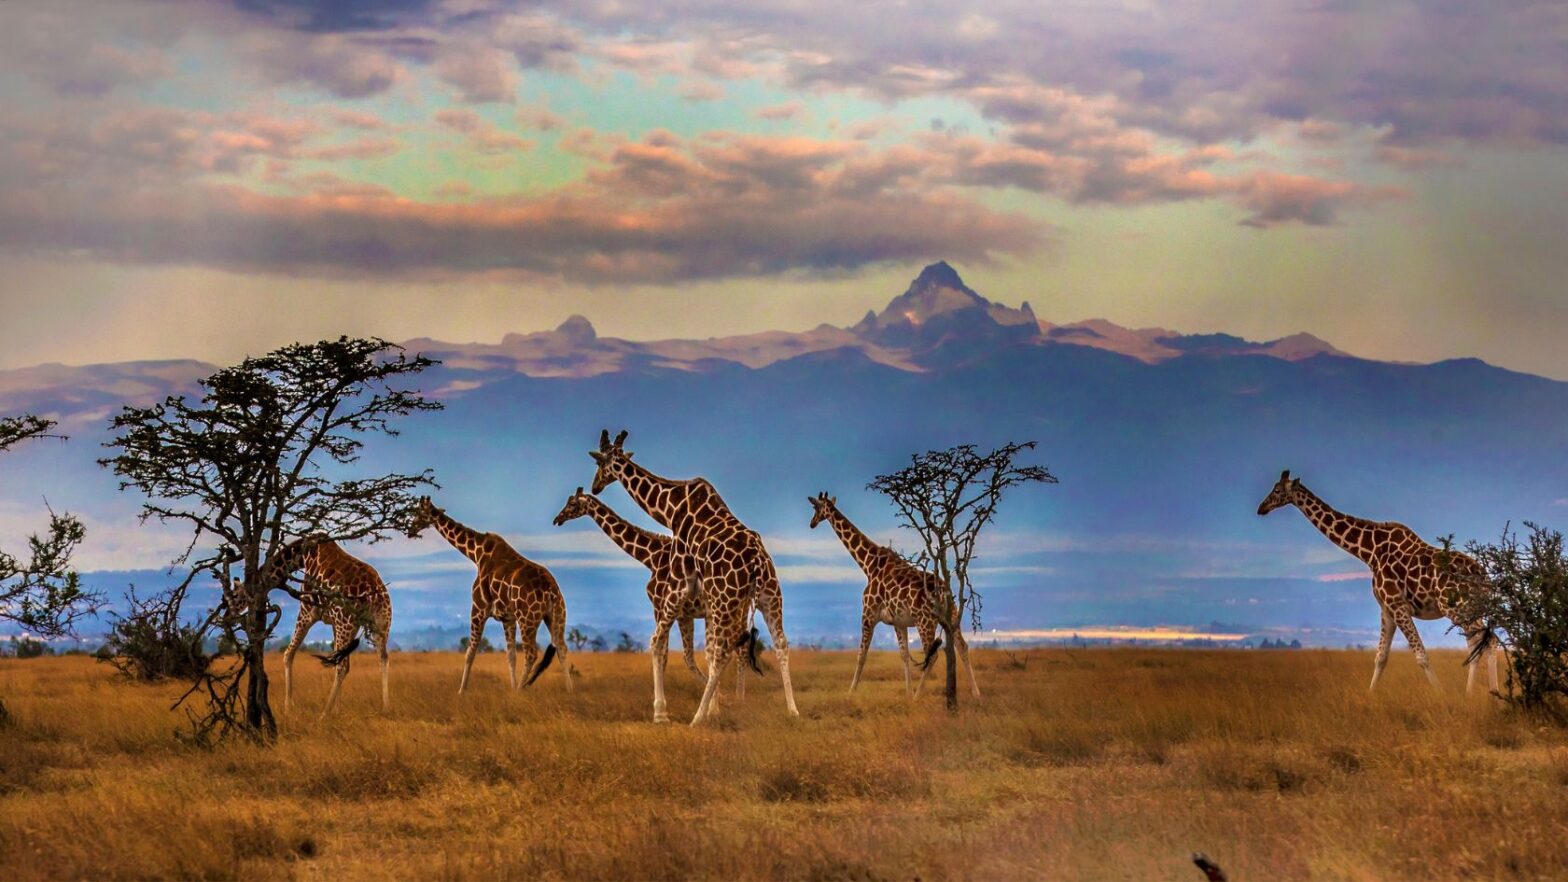 Here Are A Few Facts About The Five Tallest Mountains In Africa